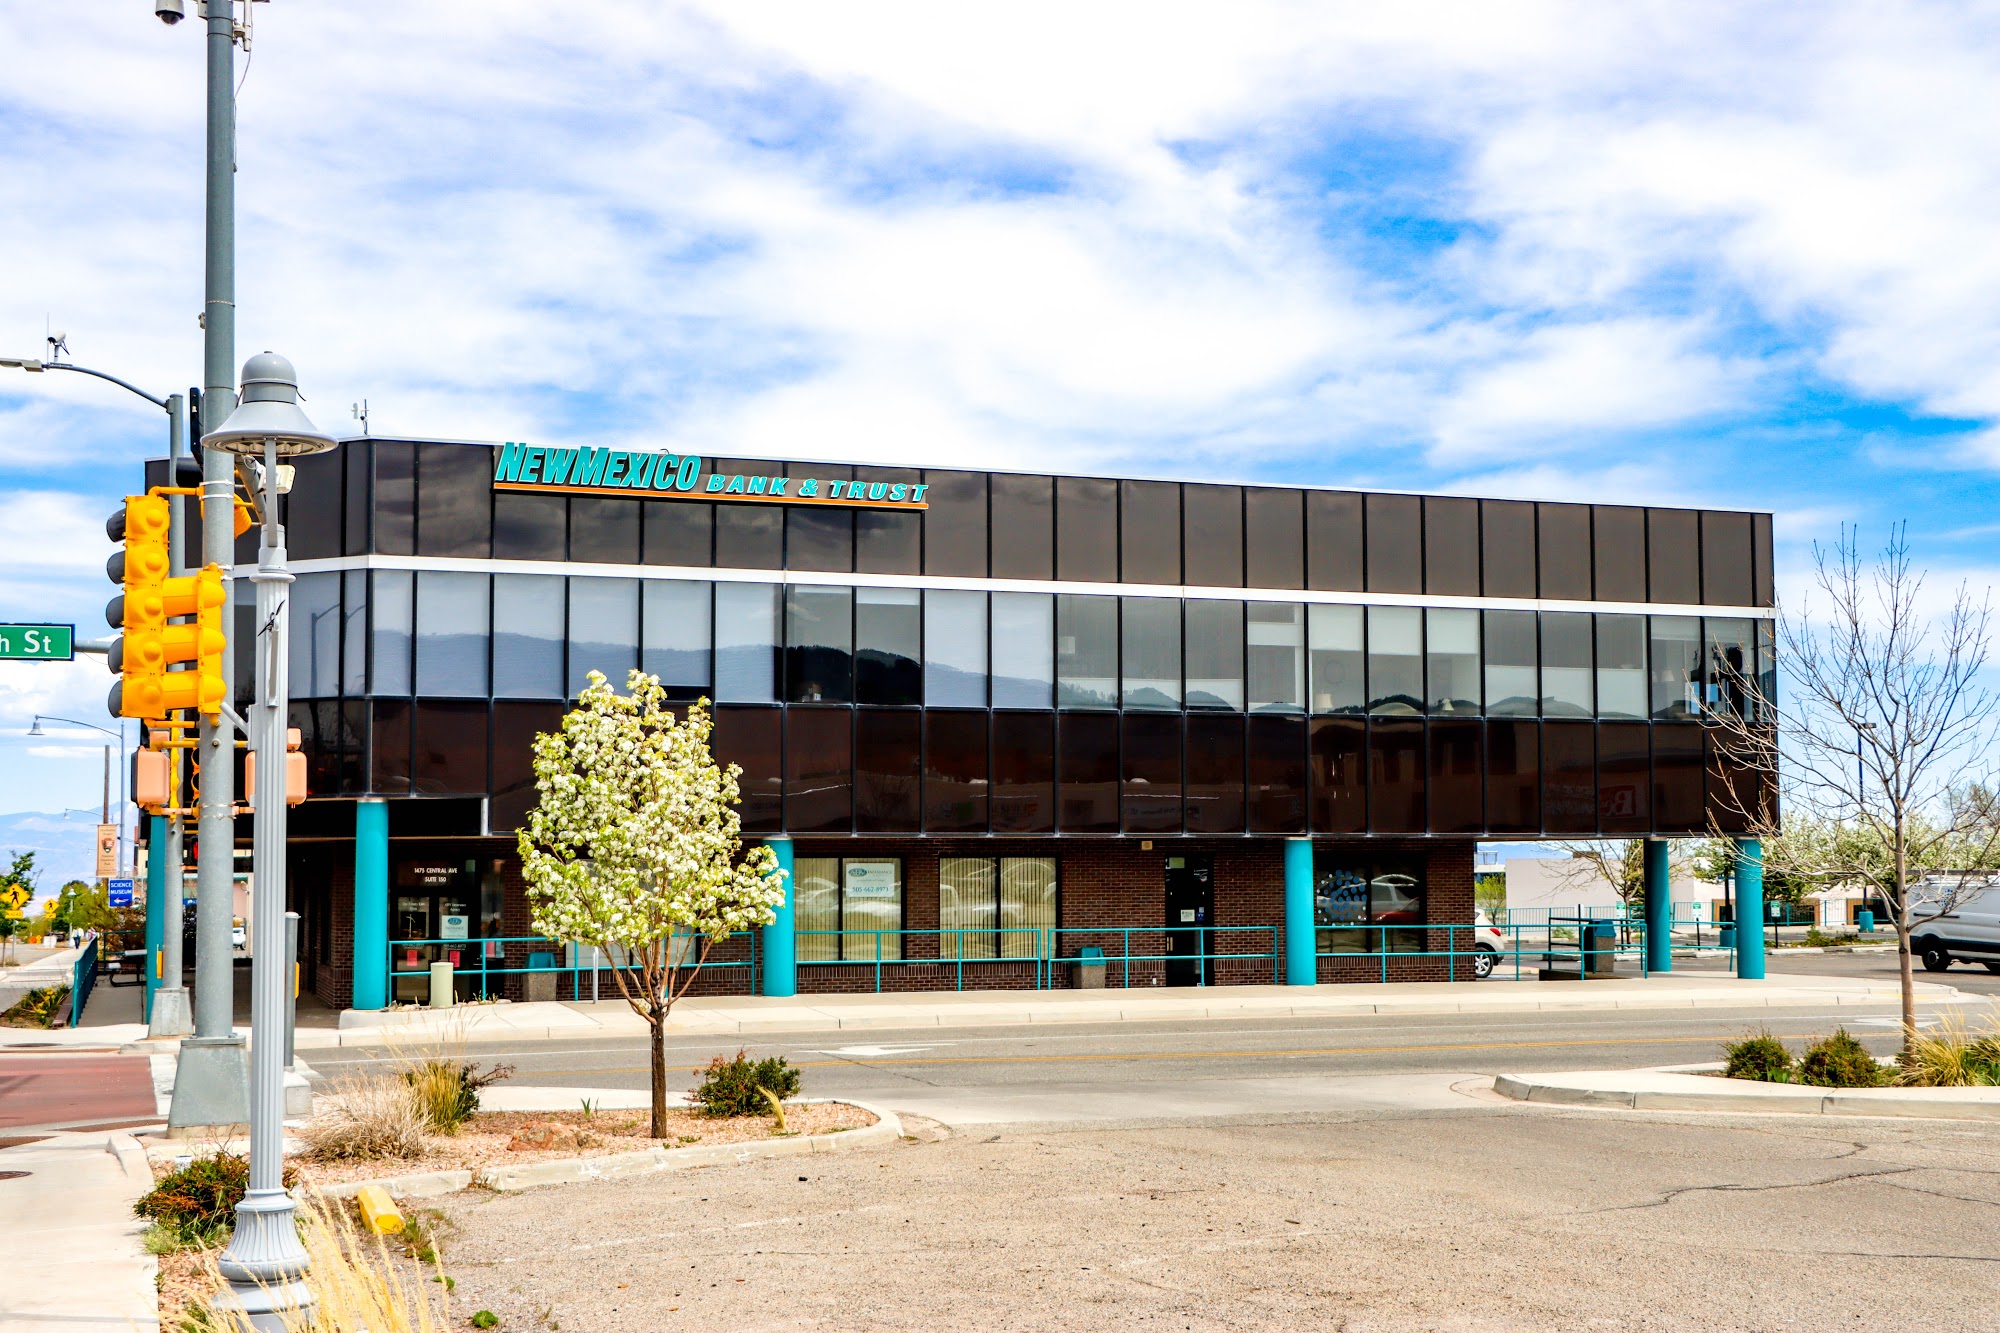 New Mexico Bank & Trust, a division of HTLF Bank